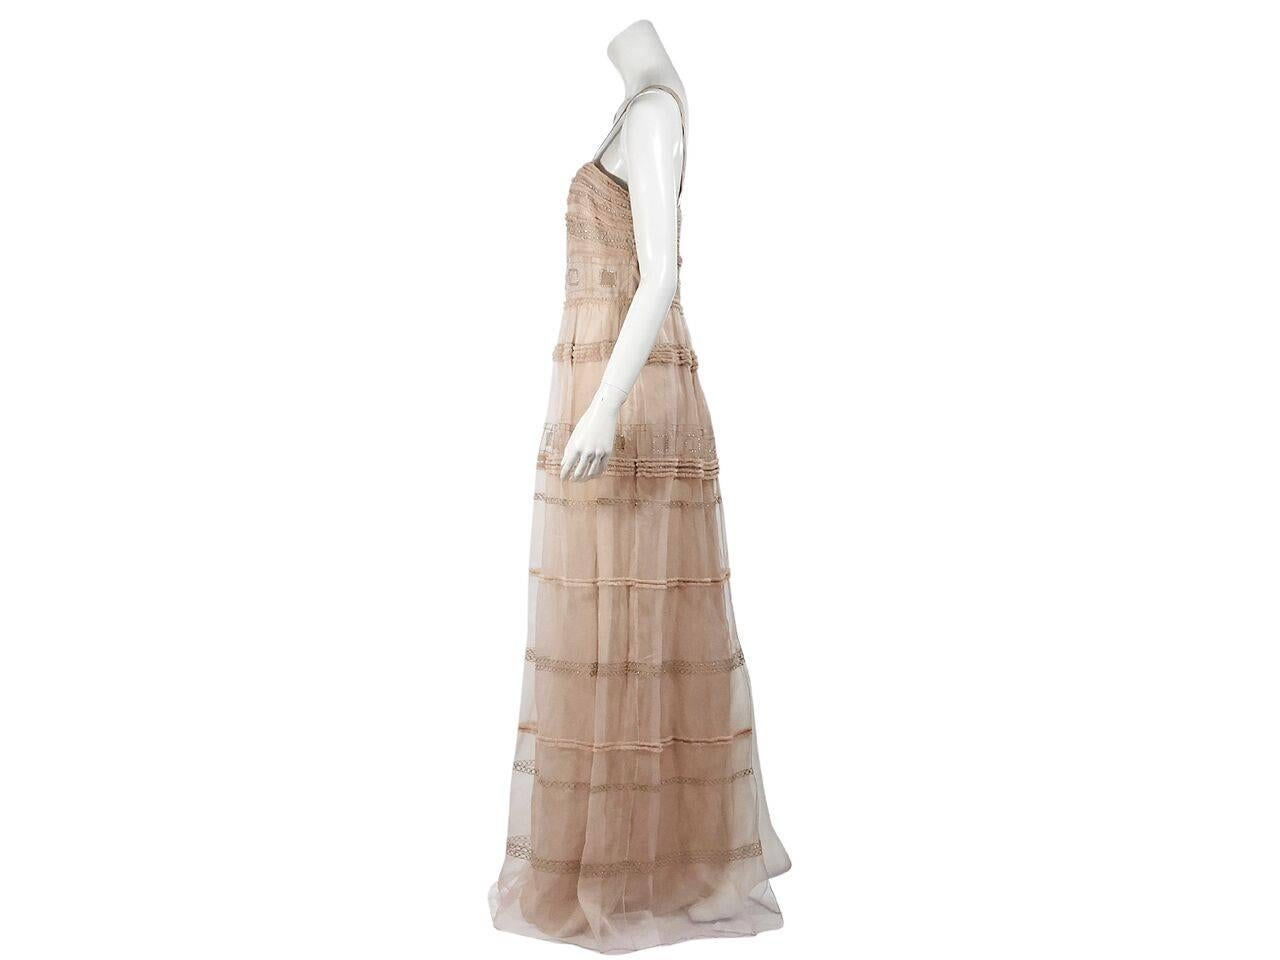 Product details:  Nude Cambon silk maxi dress by Temperley London.  Embelished with crystals.  Squareneck.  Sleeveless.  Concealed back zip closure.  Back center hem slit. 
Condition: Pre-owned. New with tags.
Est. Retail $ 3,930.00